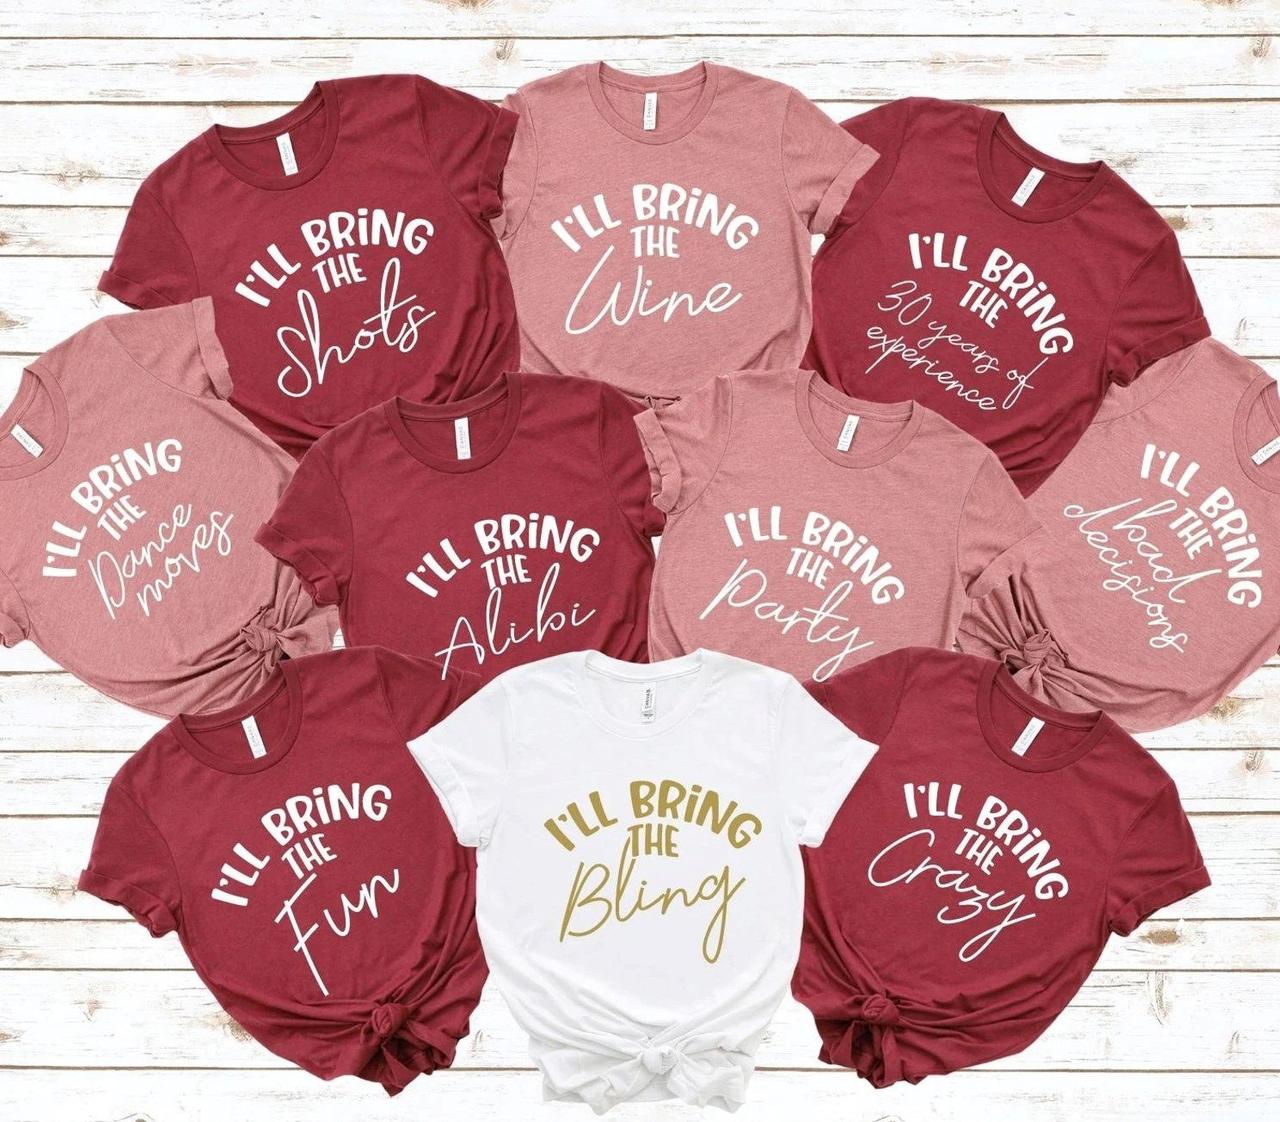 Hen Do T-Shirts: From Classy to Tacky - hitched.co.uk